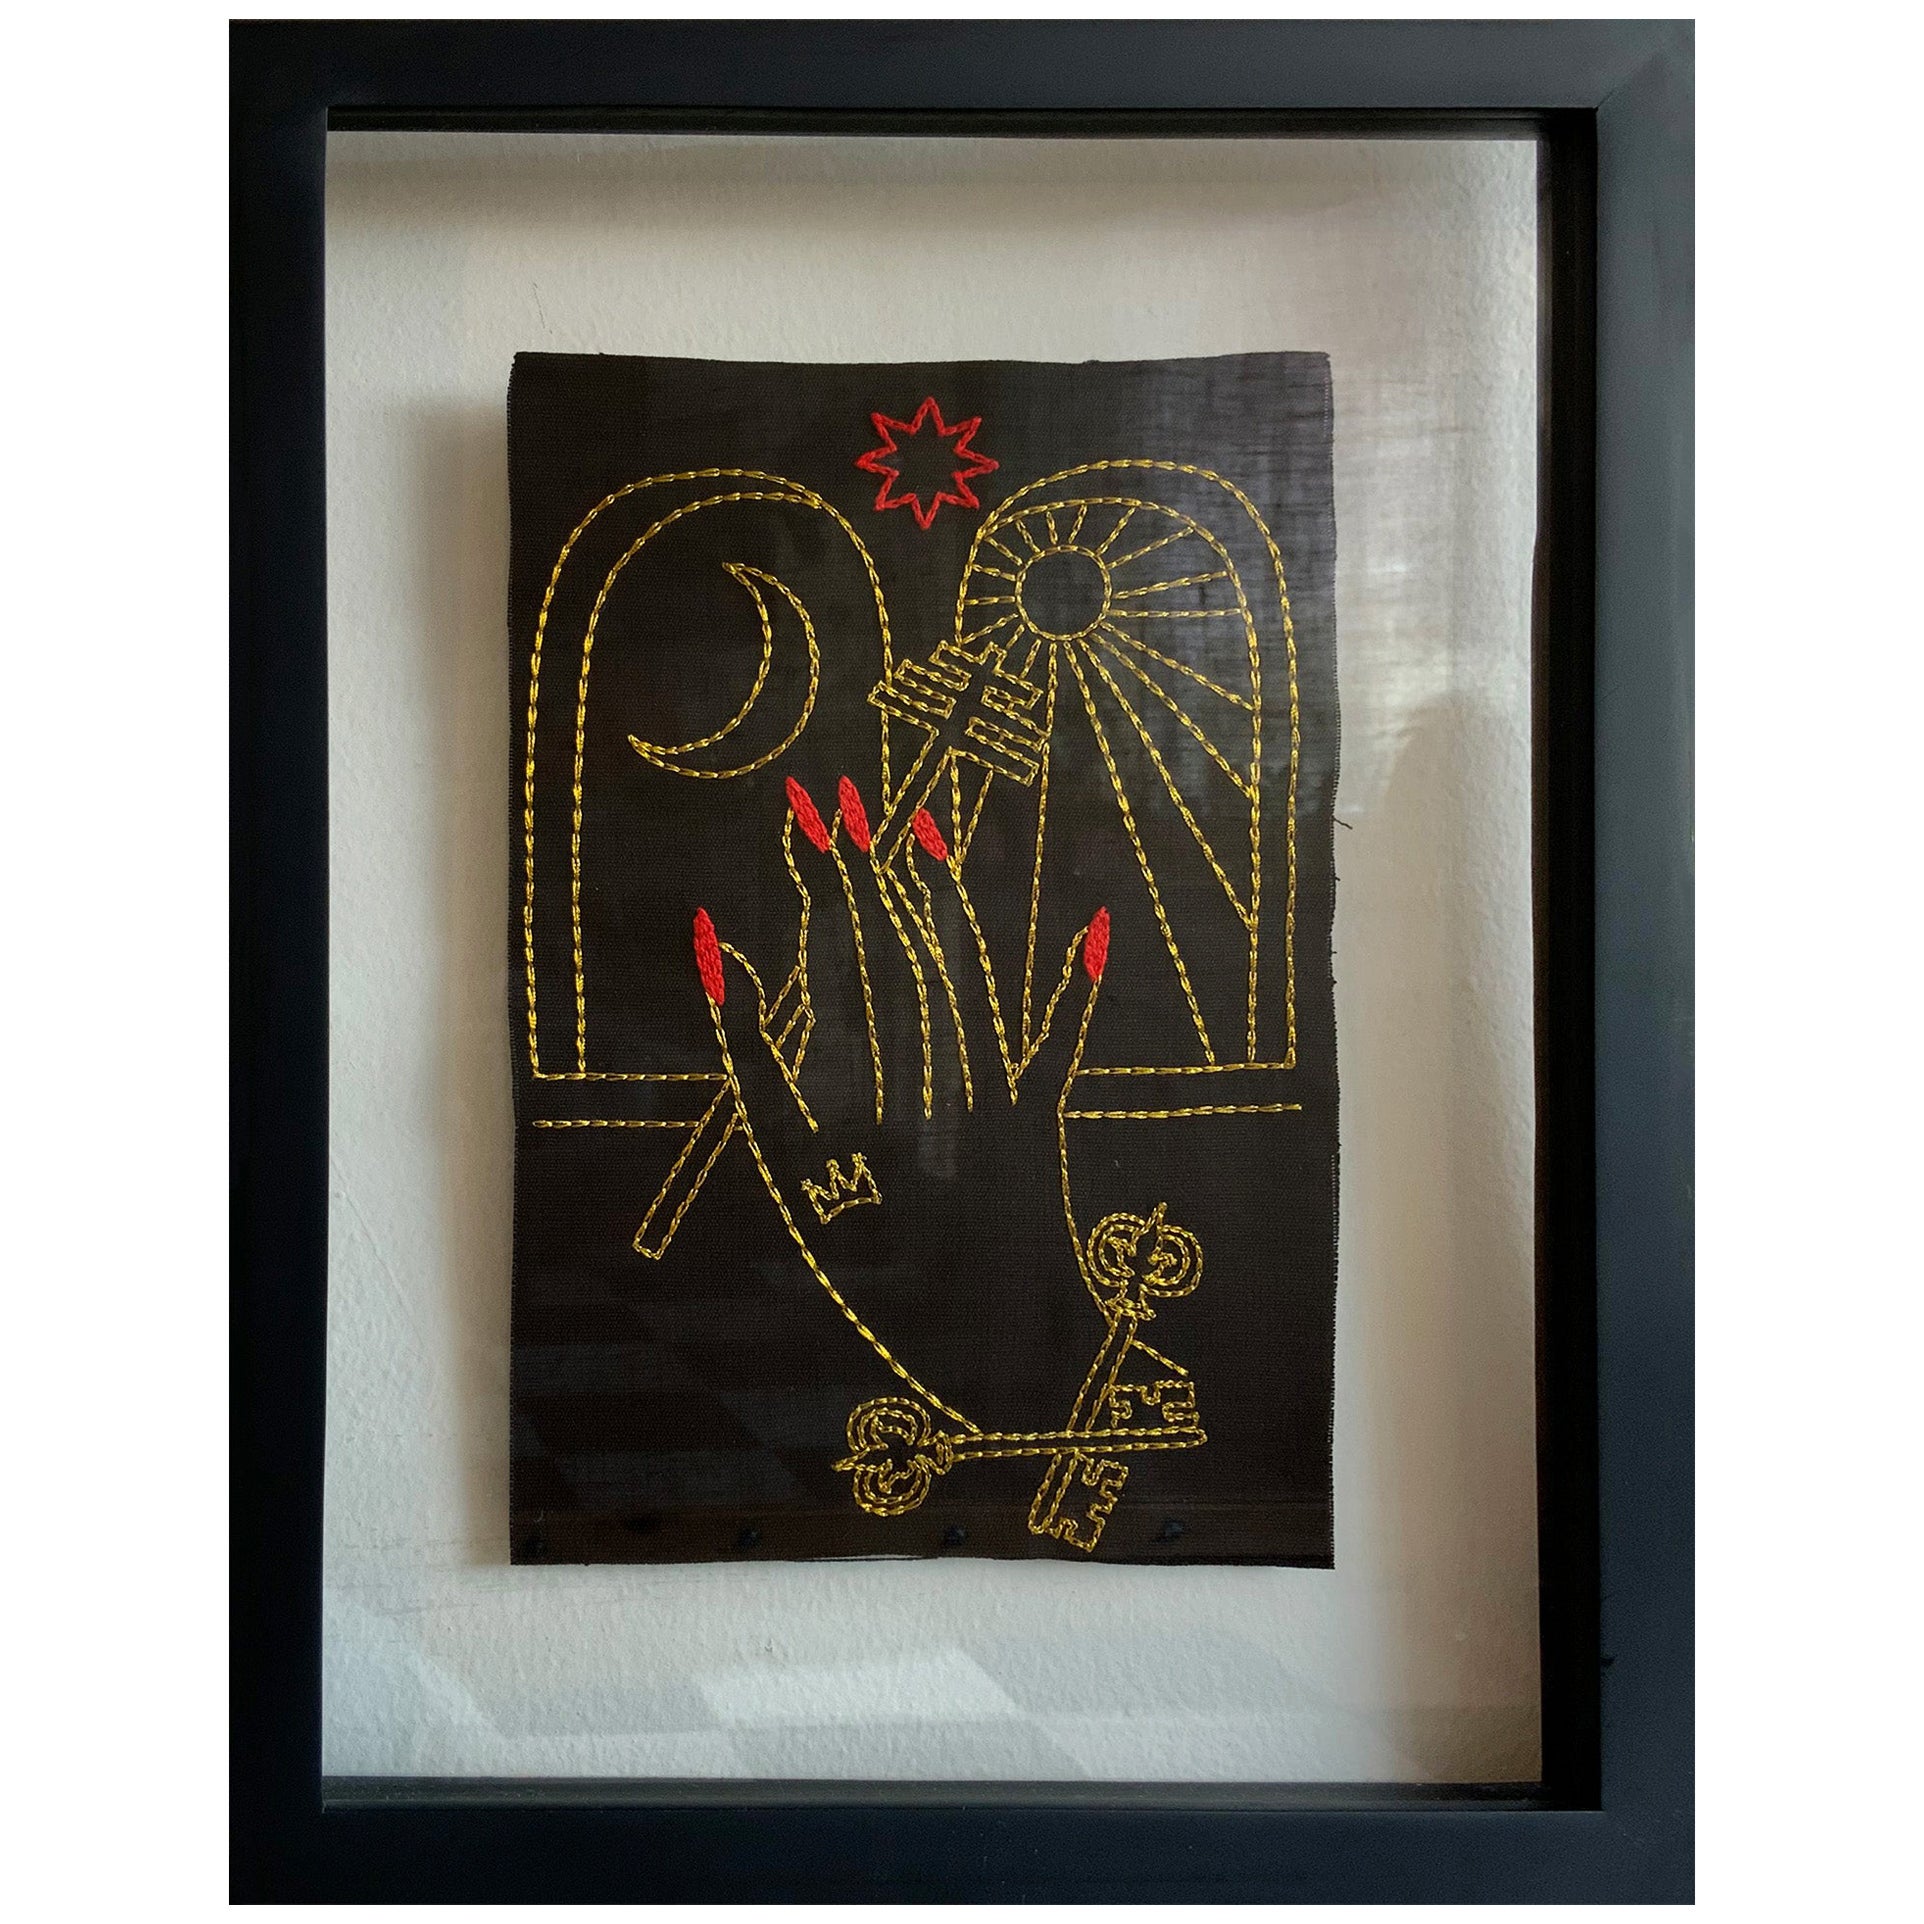 El Sumo Sacerdote. From The Ventura Series.  Embroidery thread on canvas. Framed For Sale